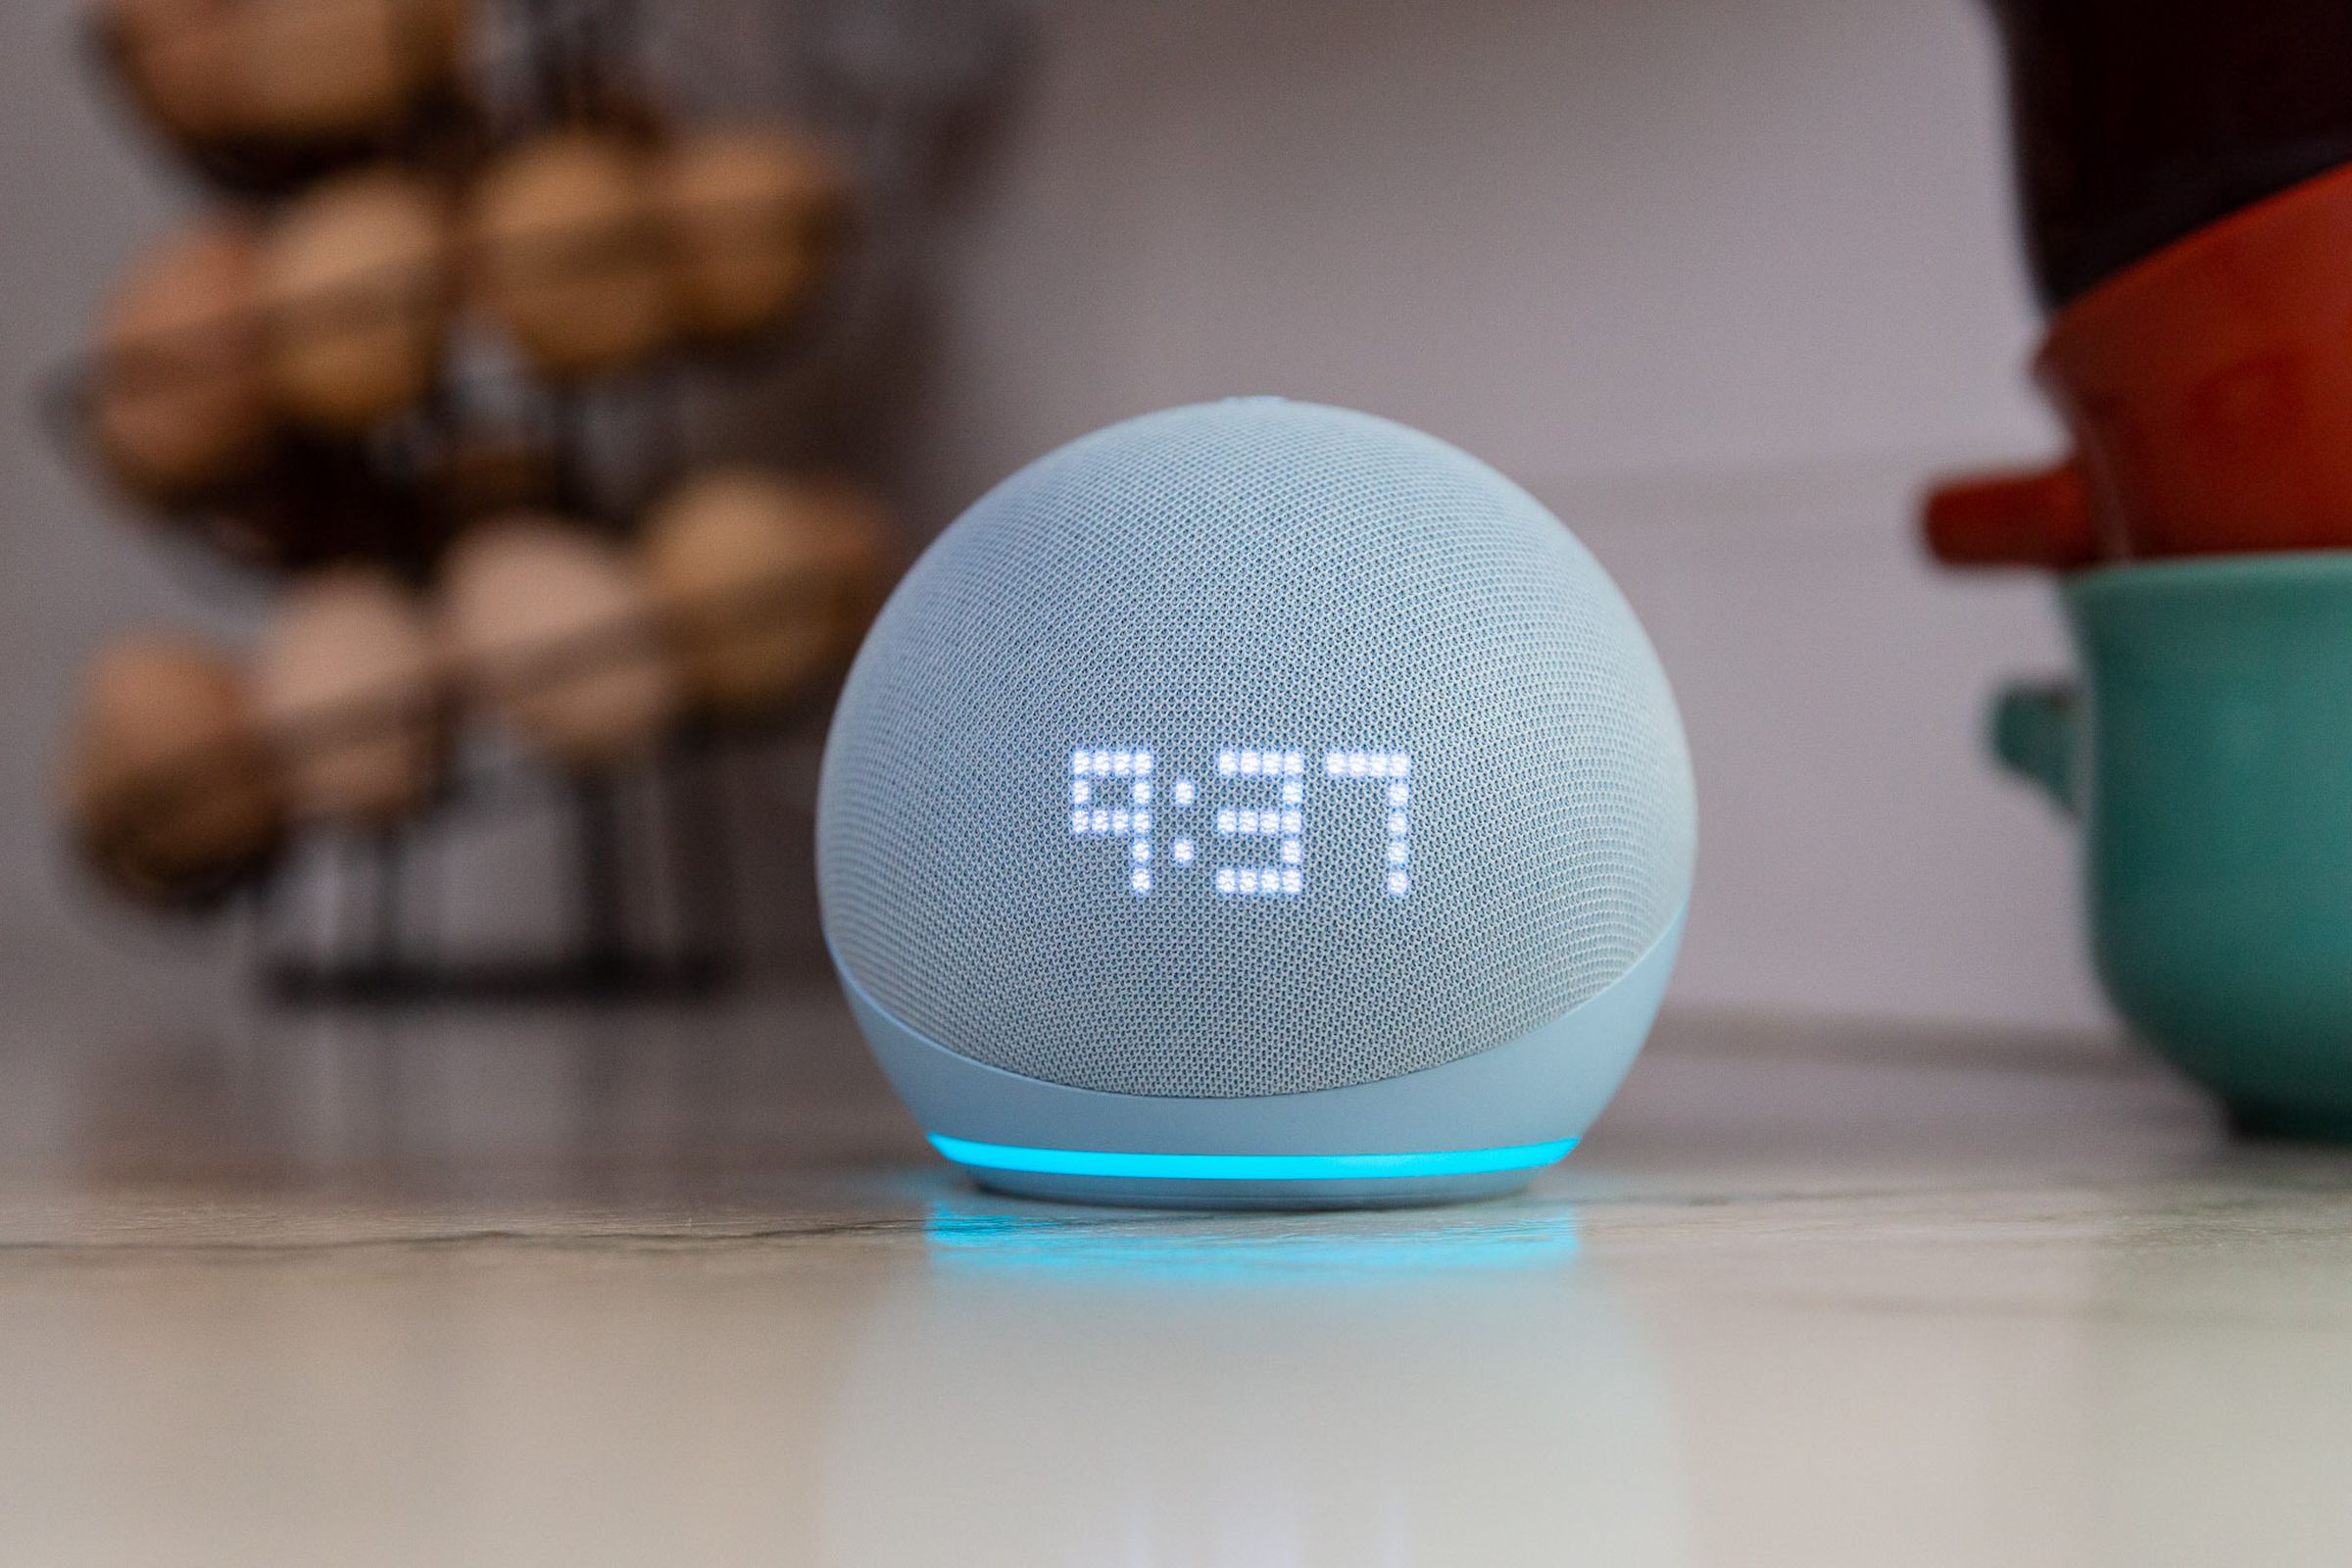 Amazon’s fifth-gen Echo Dot smart speaker showing the time on its display while sitting on a kitchen counter.